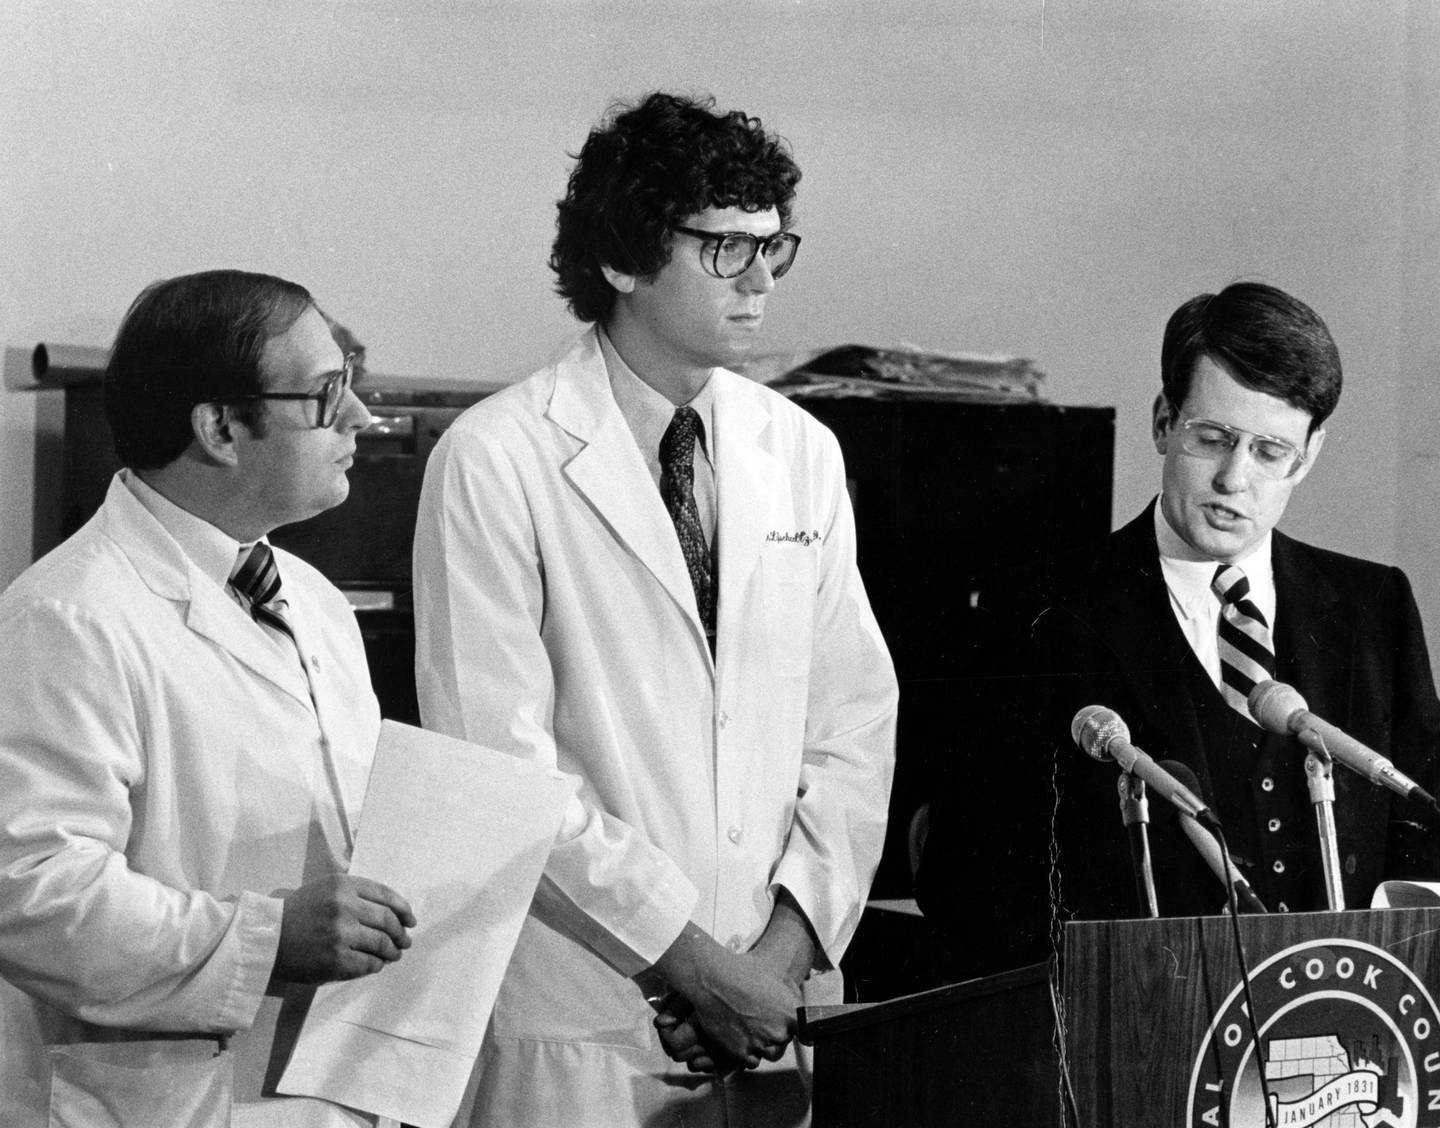 Dr. Edmund Donoghue, right, then the deputy chief medical examiner in Cook County, discusses the Tylenol poisonings on Sept. 30, 1982. At left are Michael Schaffer, the toxicologist who tested the capsules, and Dr. Barry Lifschultz.